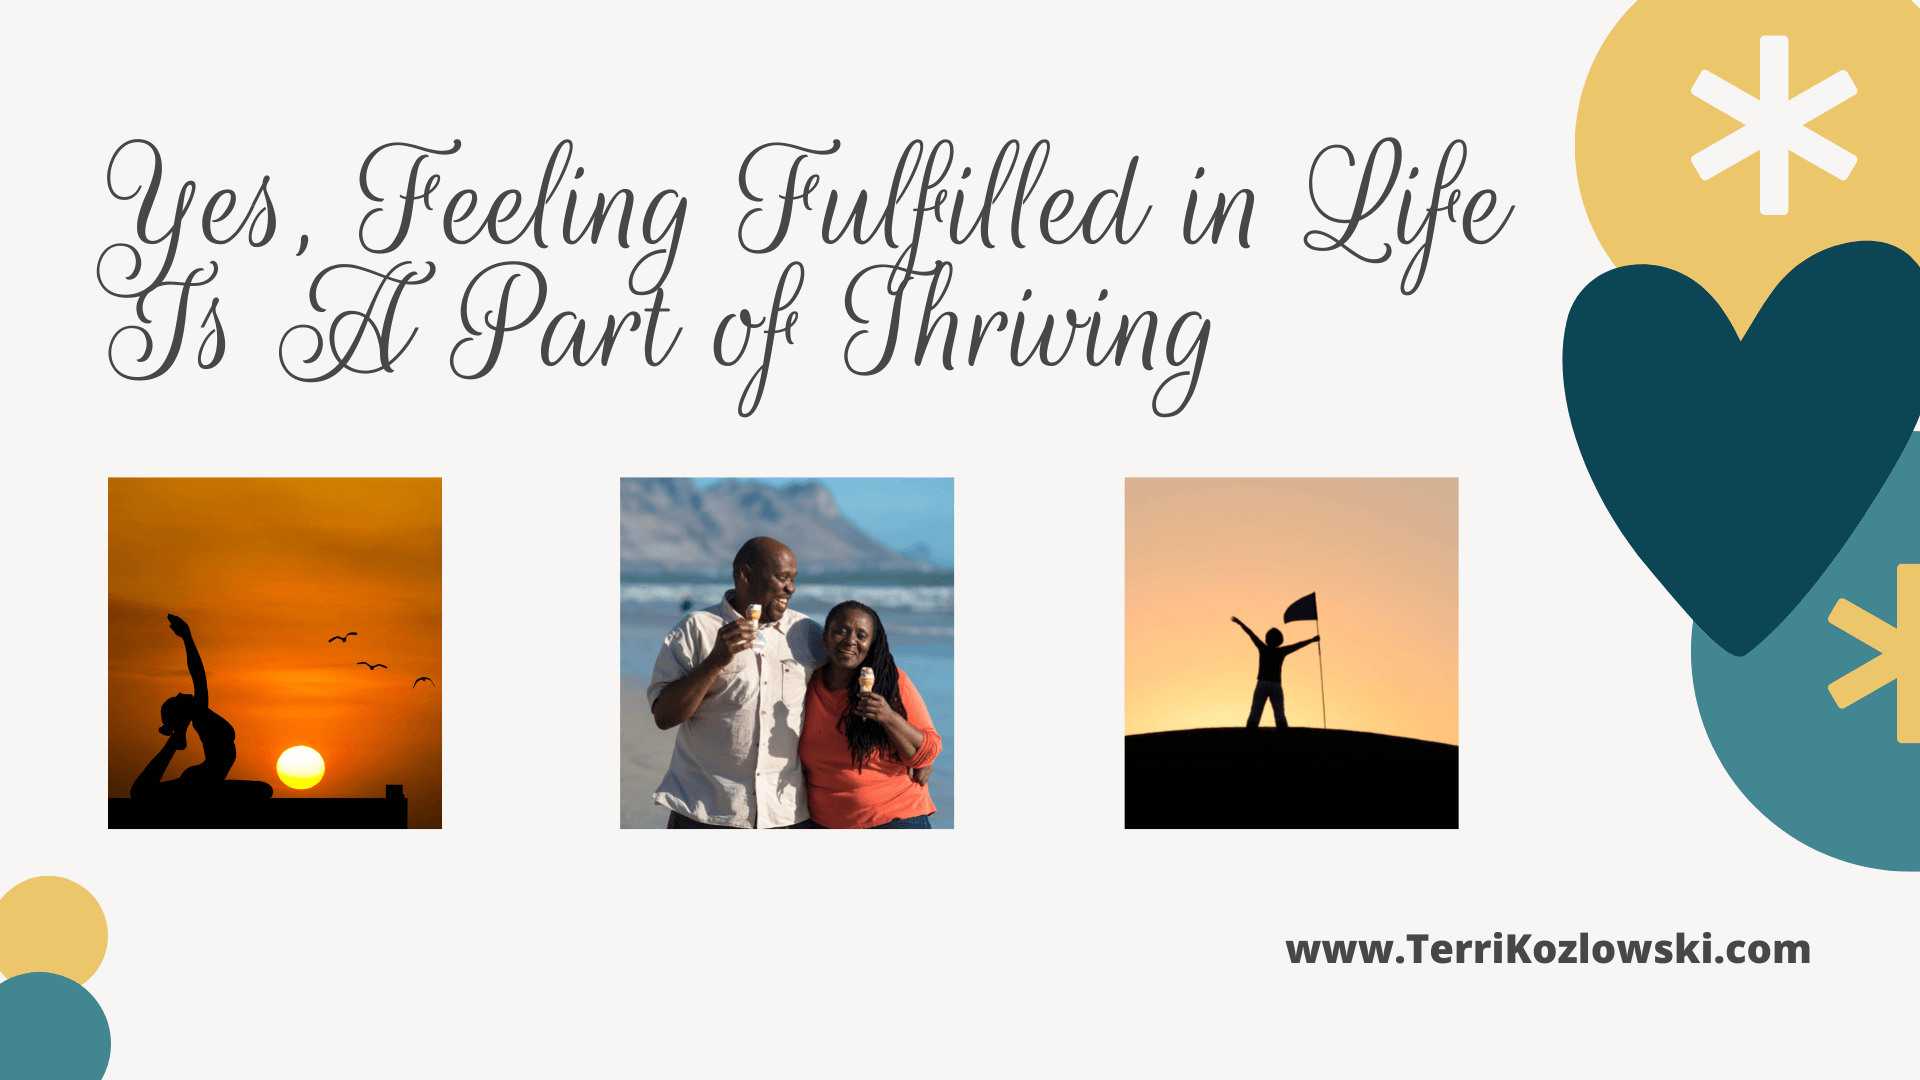 Yes, Feeling Fulfilled in Life Is A Part of Thriving